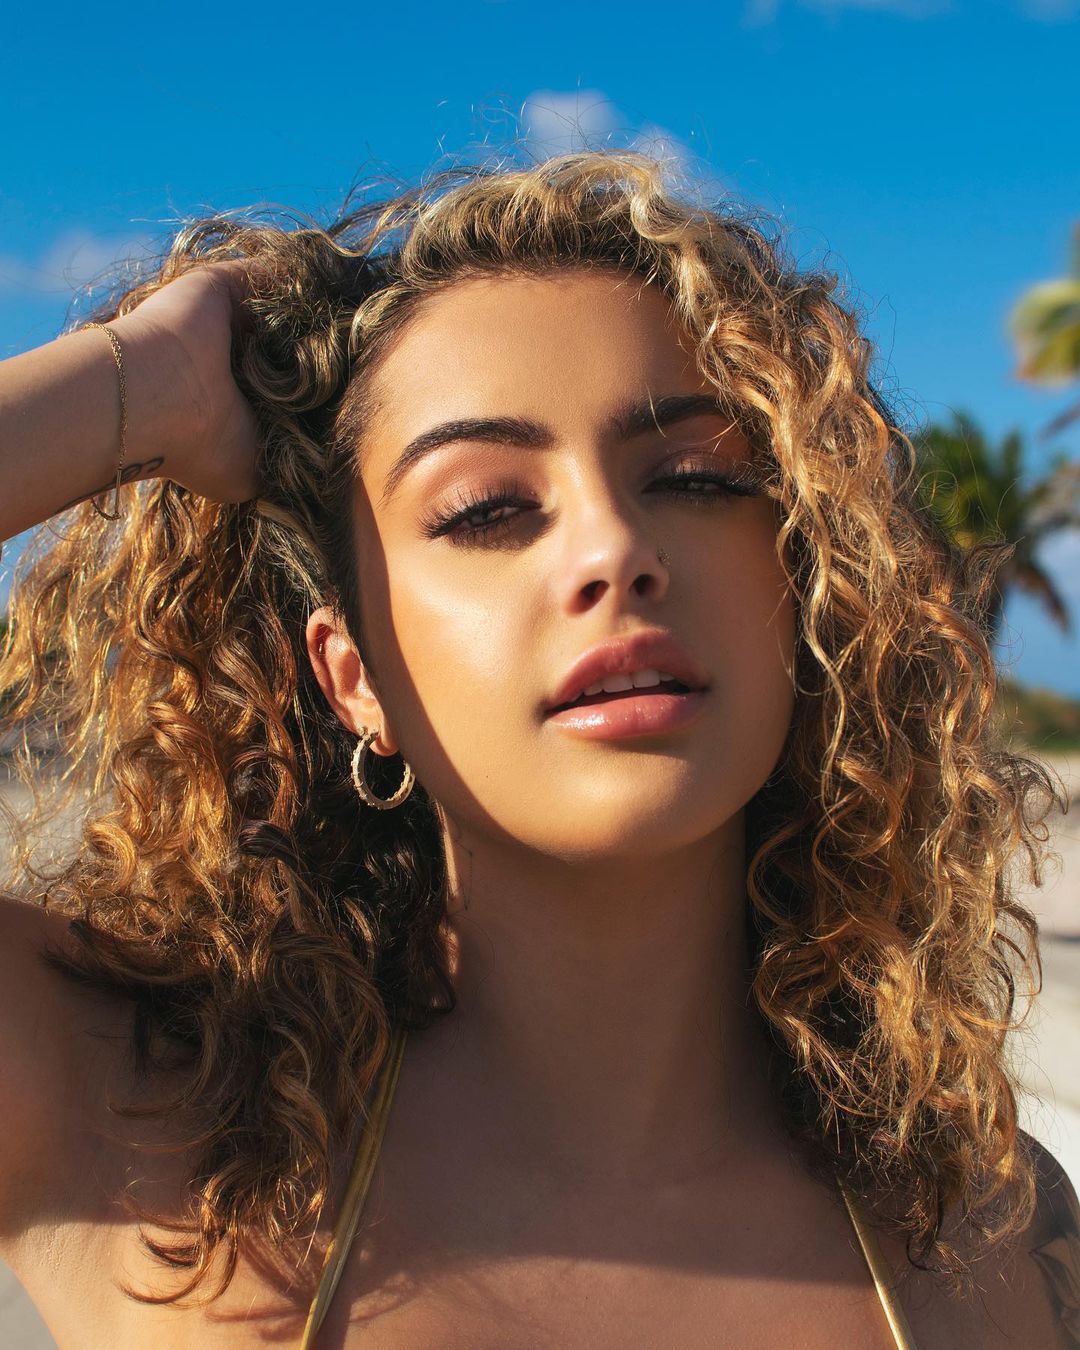 Malu Trevejo has been linked with many men but has a dating history with a few